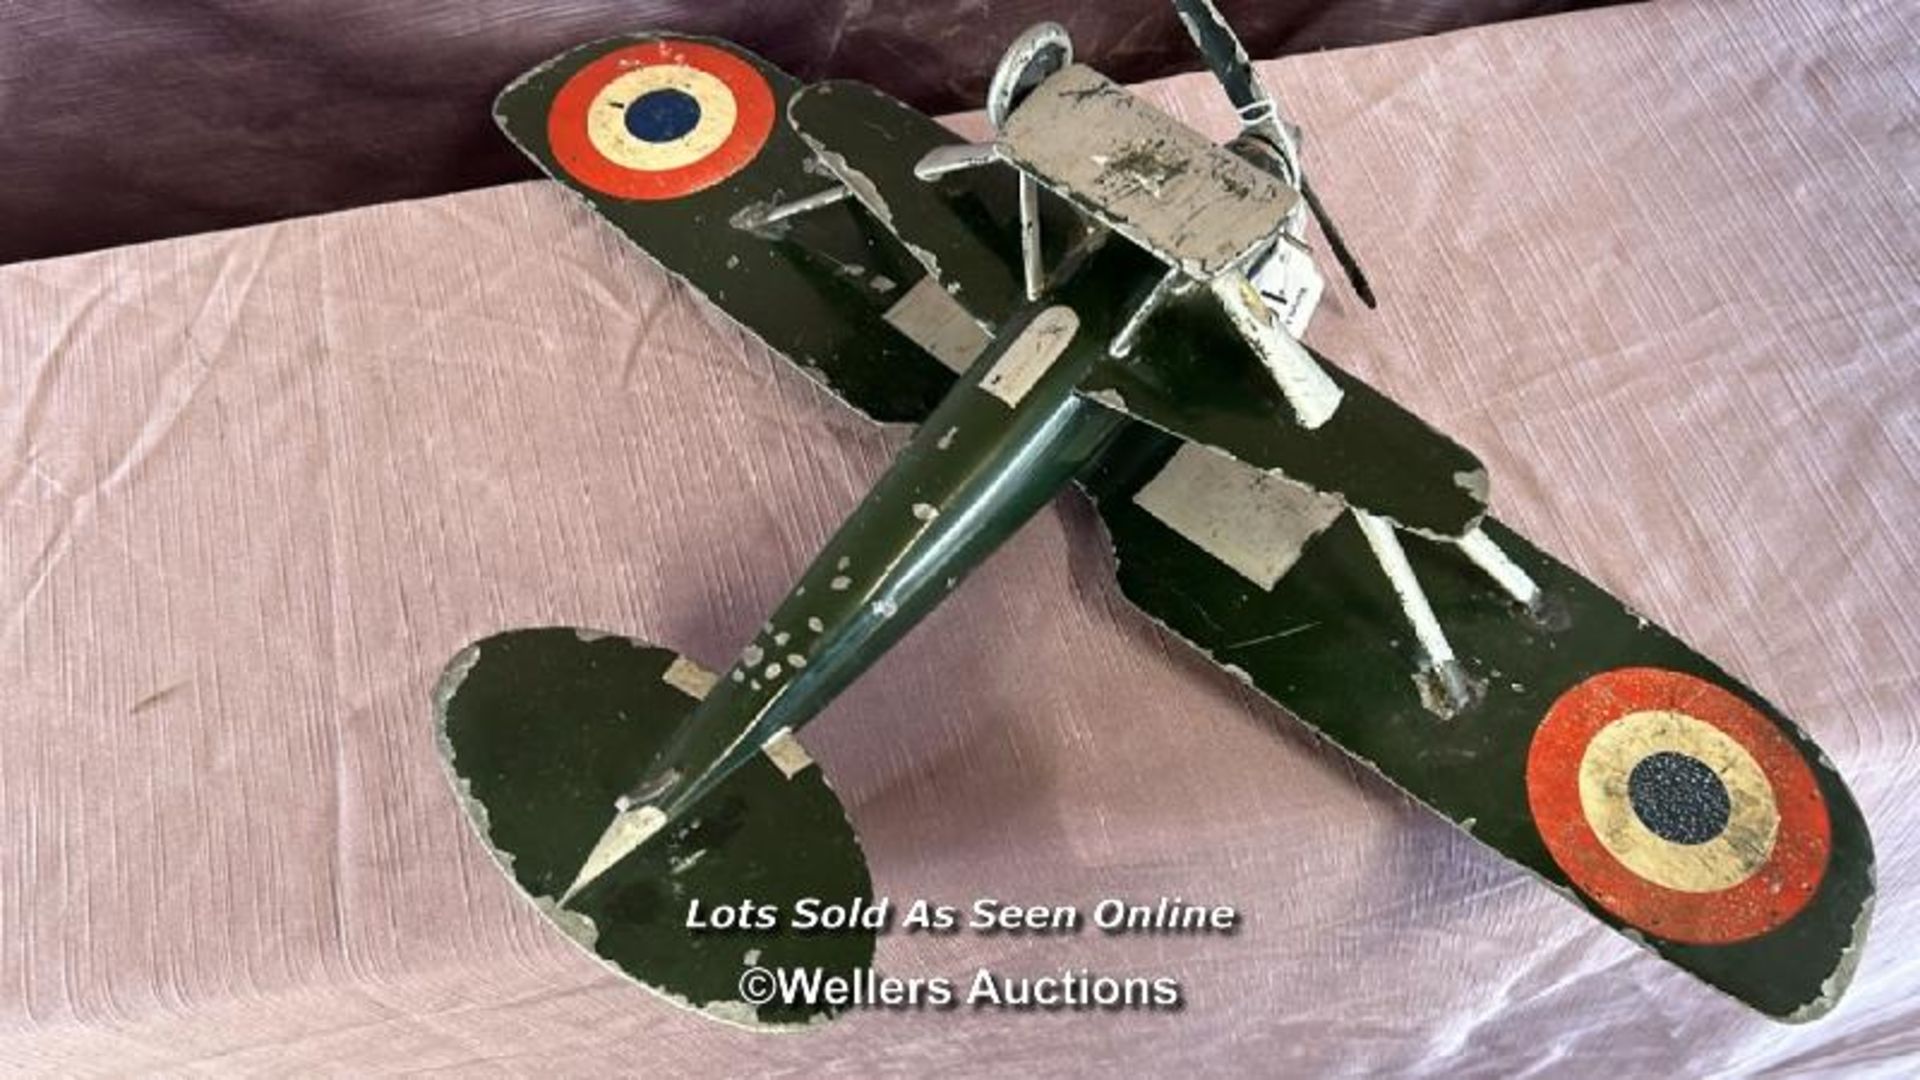 1:72 SCALE ROUGH BUILT METAL MODEL AIRPLANE WORLD WAR ONE FRENCH NIEUPORT-DELAGE NID 52 - Image 2 of 5